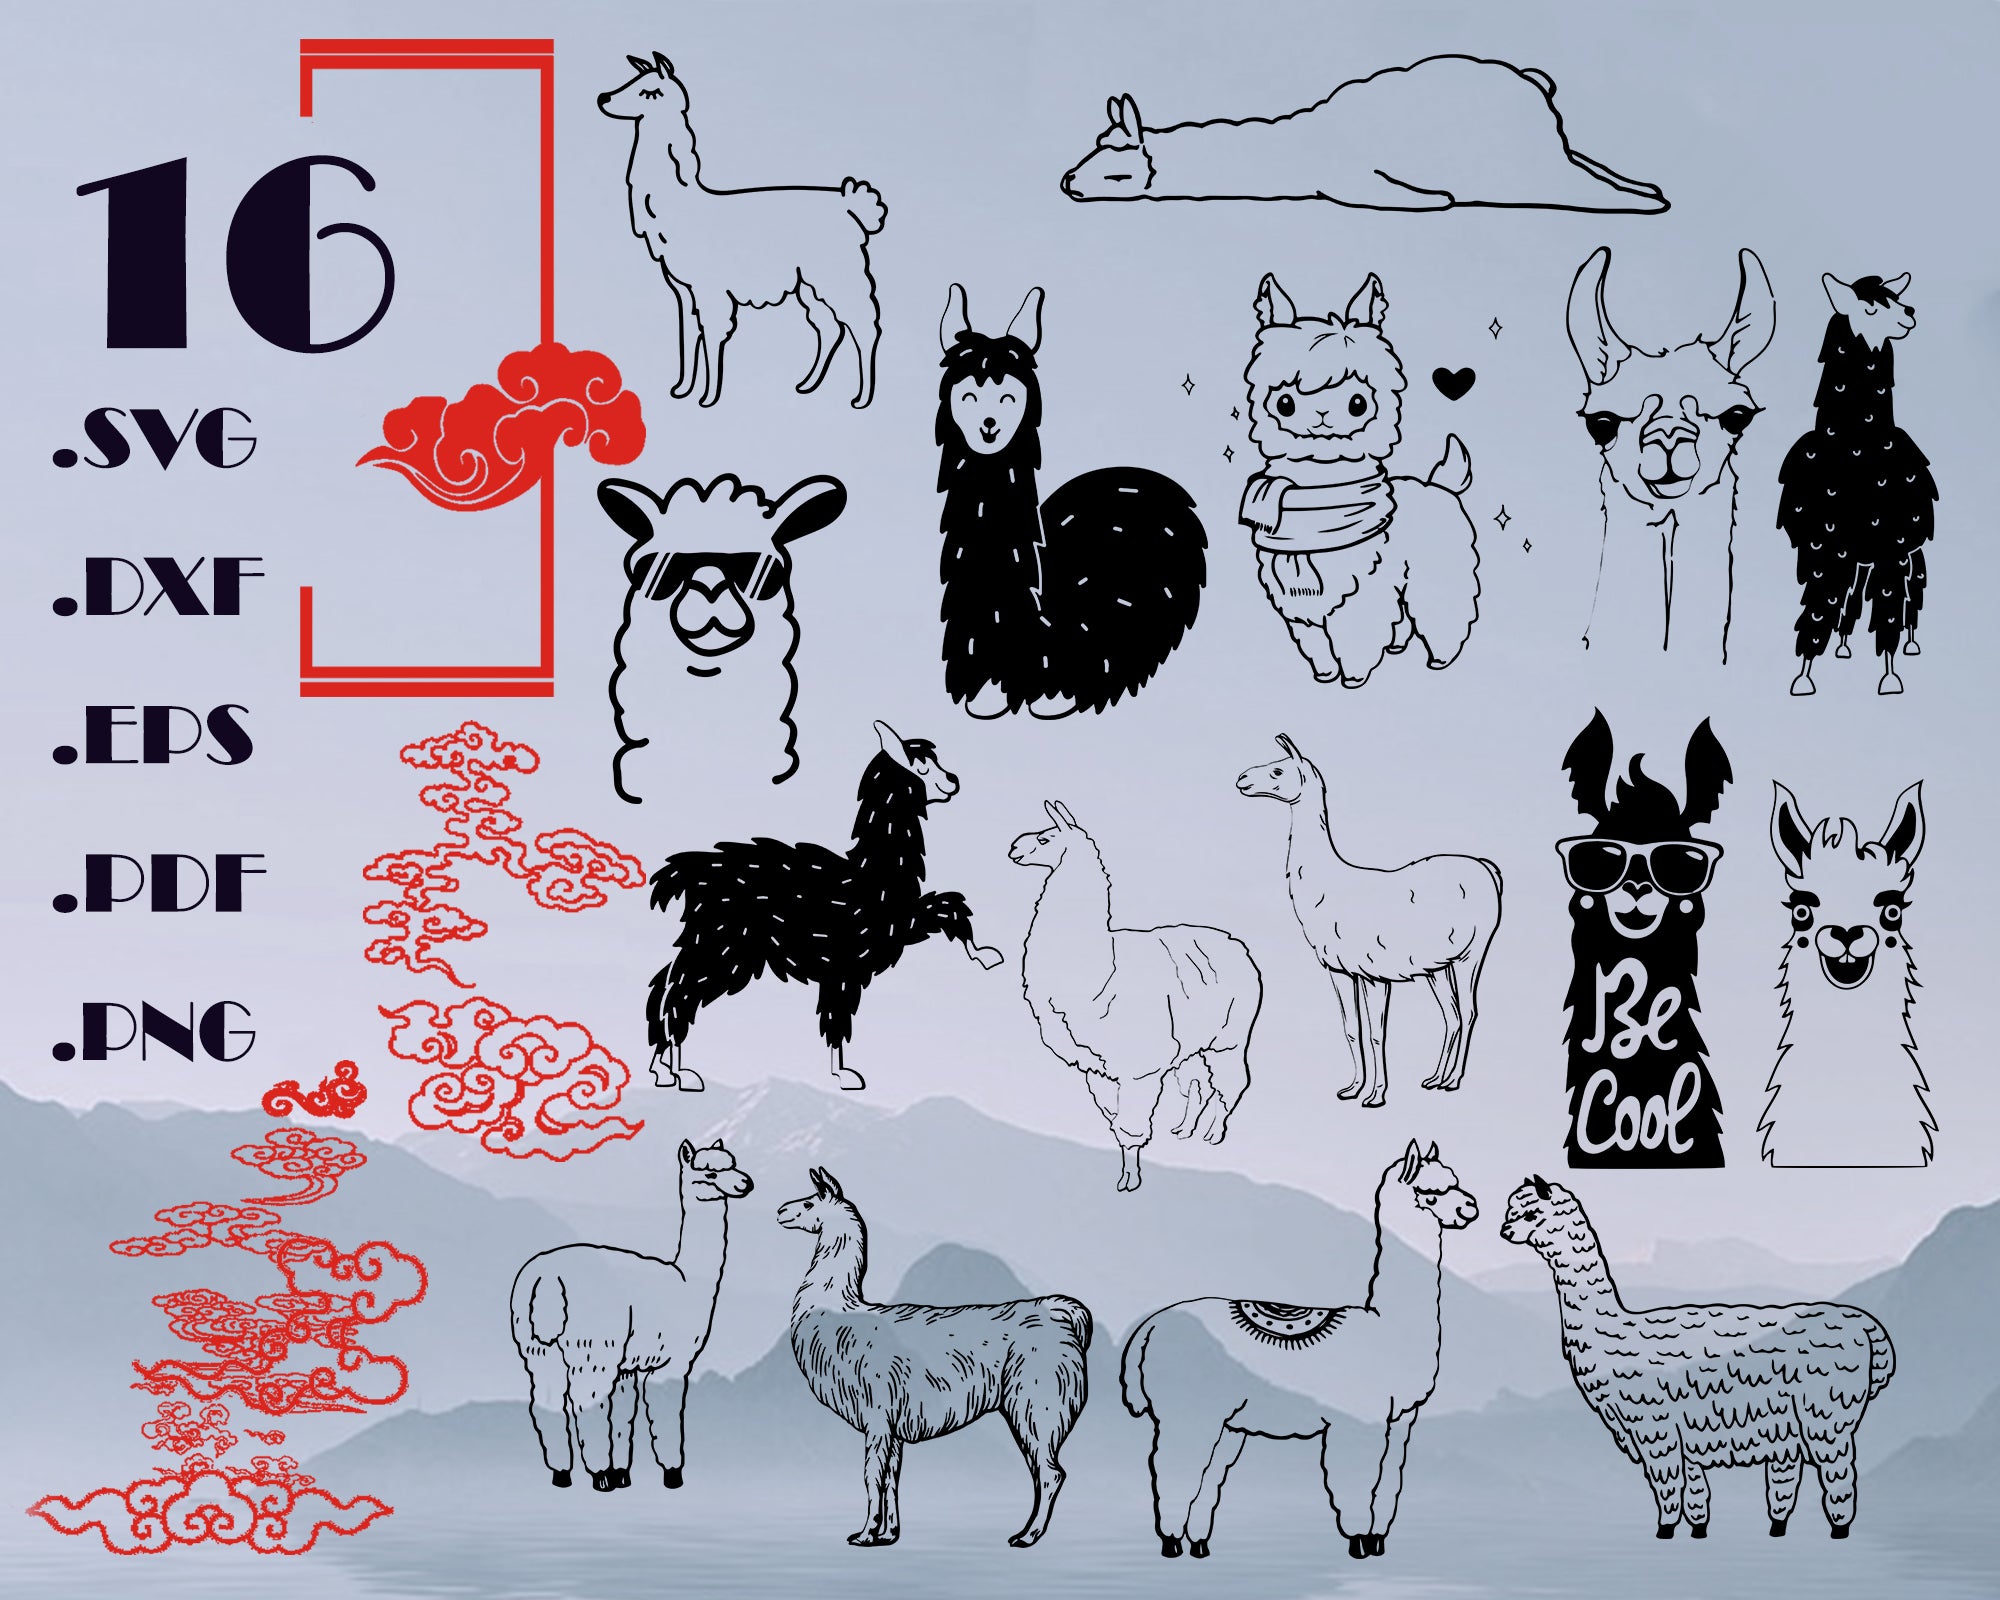 Download Clip Art Art Collectibles Png Files Layered Llama Svg Laser Cut Vector Dxf Files For Digital Download Svg Files For Cricut Cute Alpaca Cactus